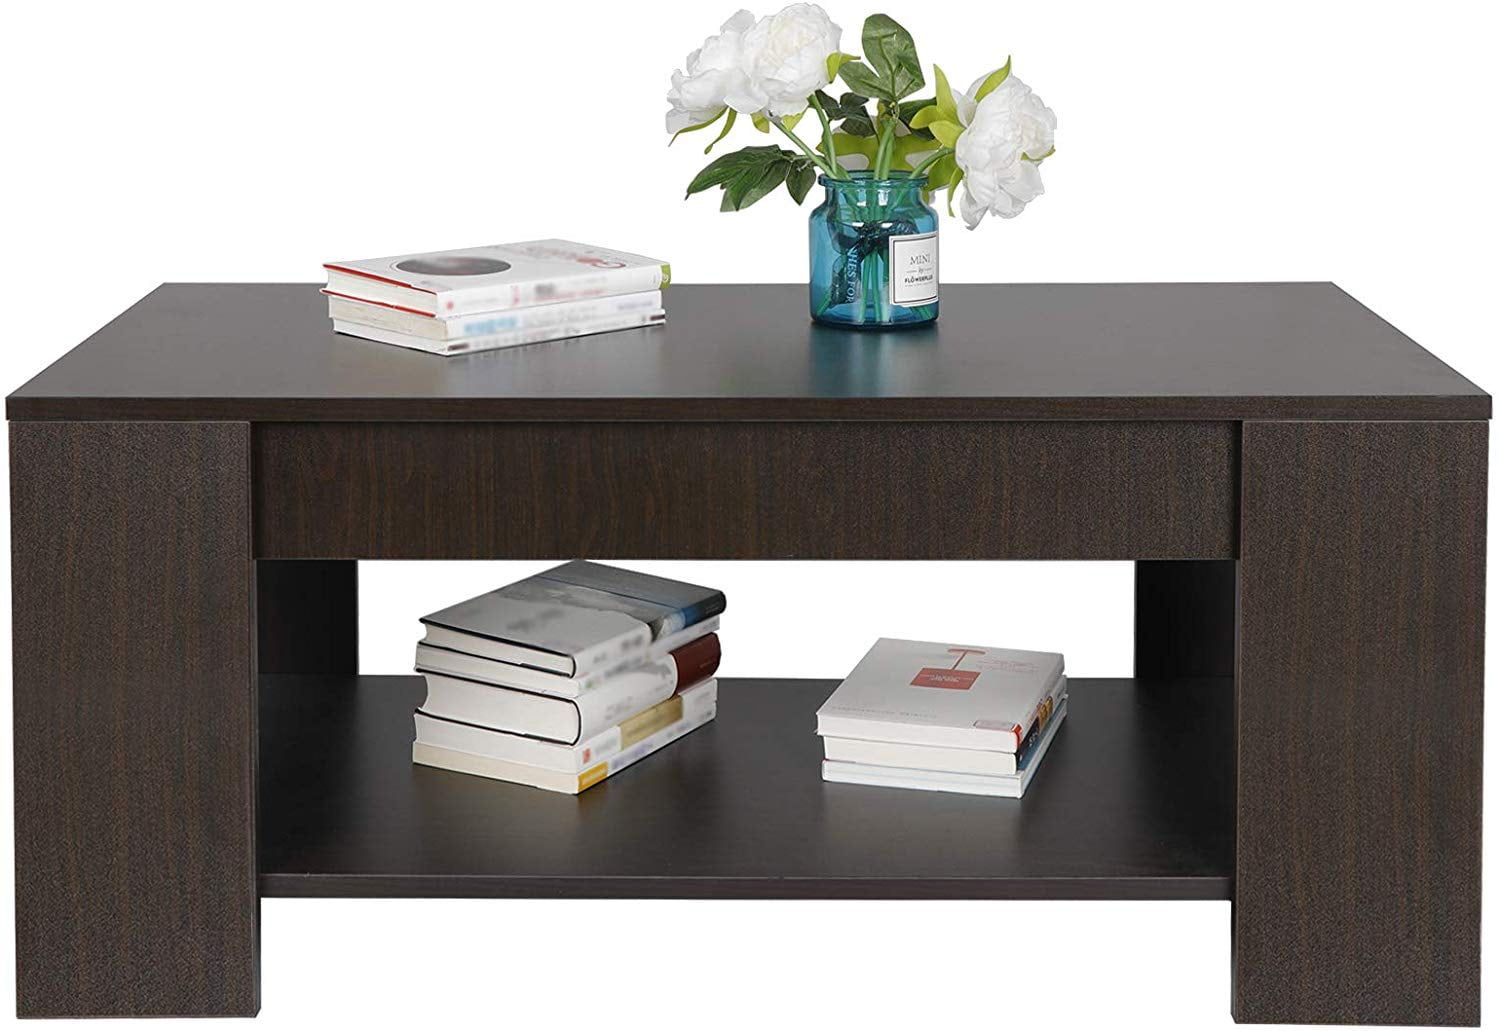 Zenstyle Lift Top Coffee Table Hidden Storage Cabinet Compartment Long Pertaining To Lift Top Coffee Tables With Hidden Storage Compartments (View 13 of 15)